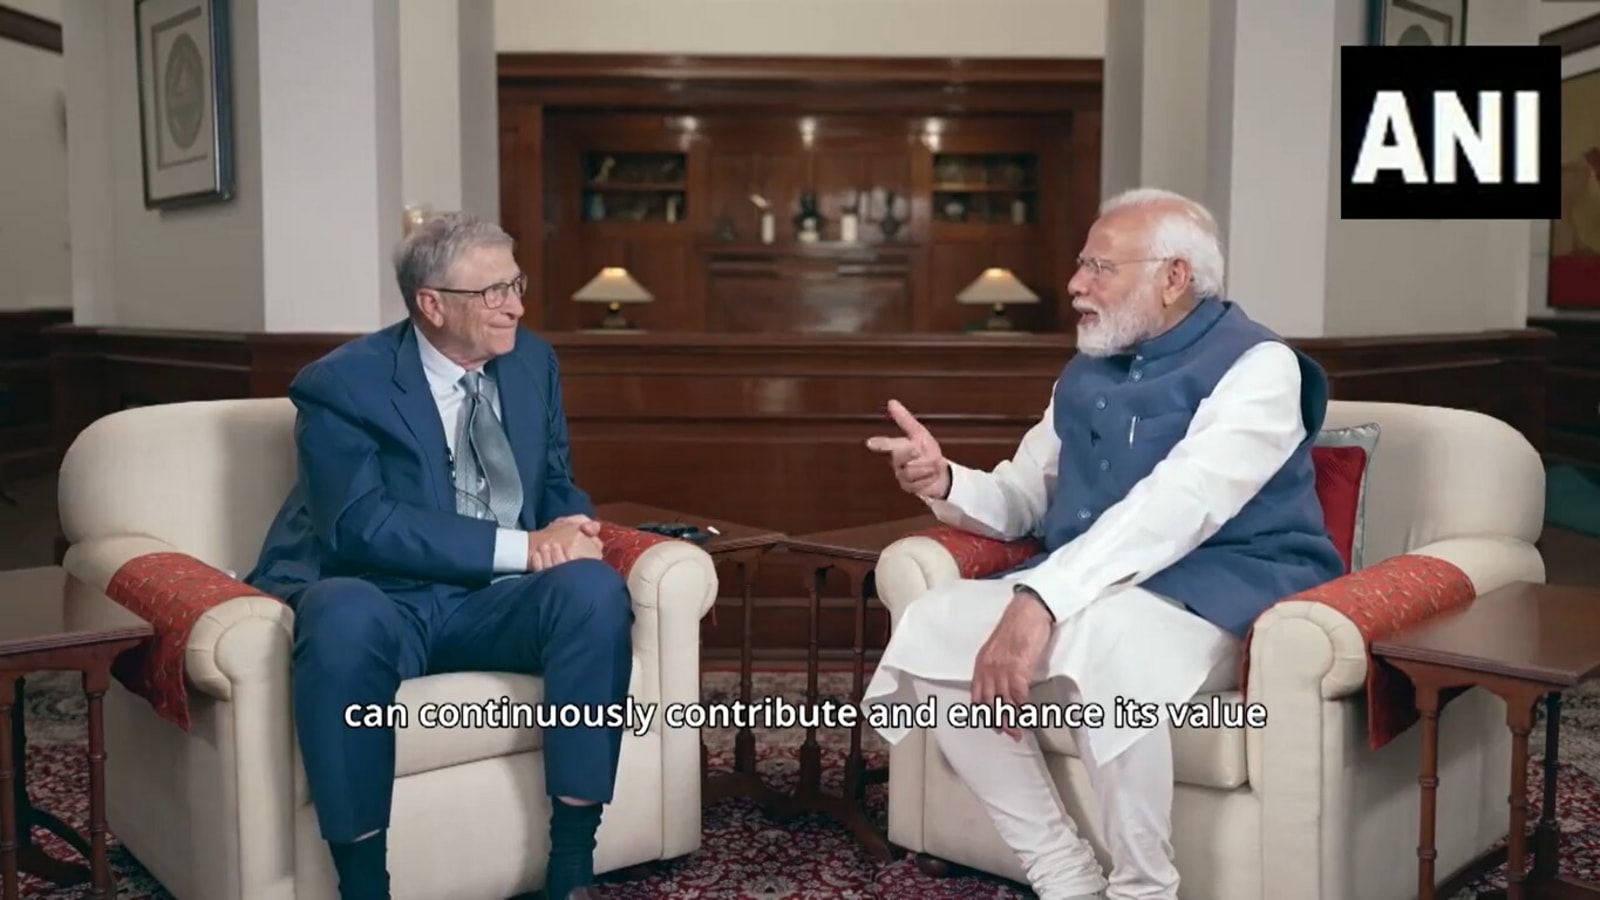 PM Modi and Bill Gates discuss India's digital revolution;  He explains how Digital India is leading the way